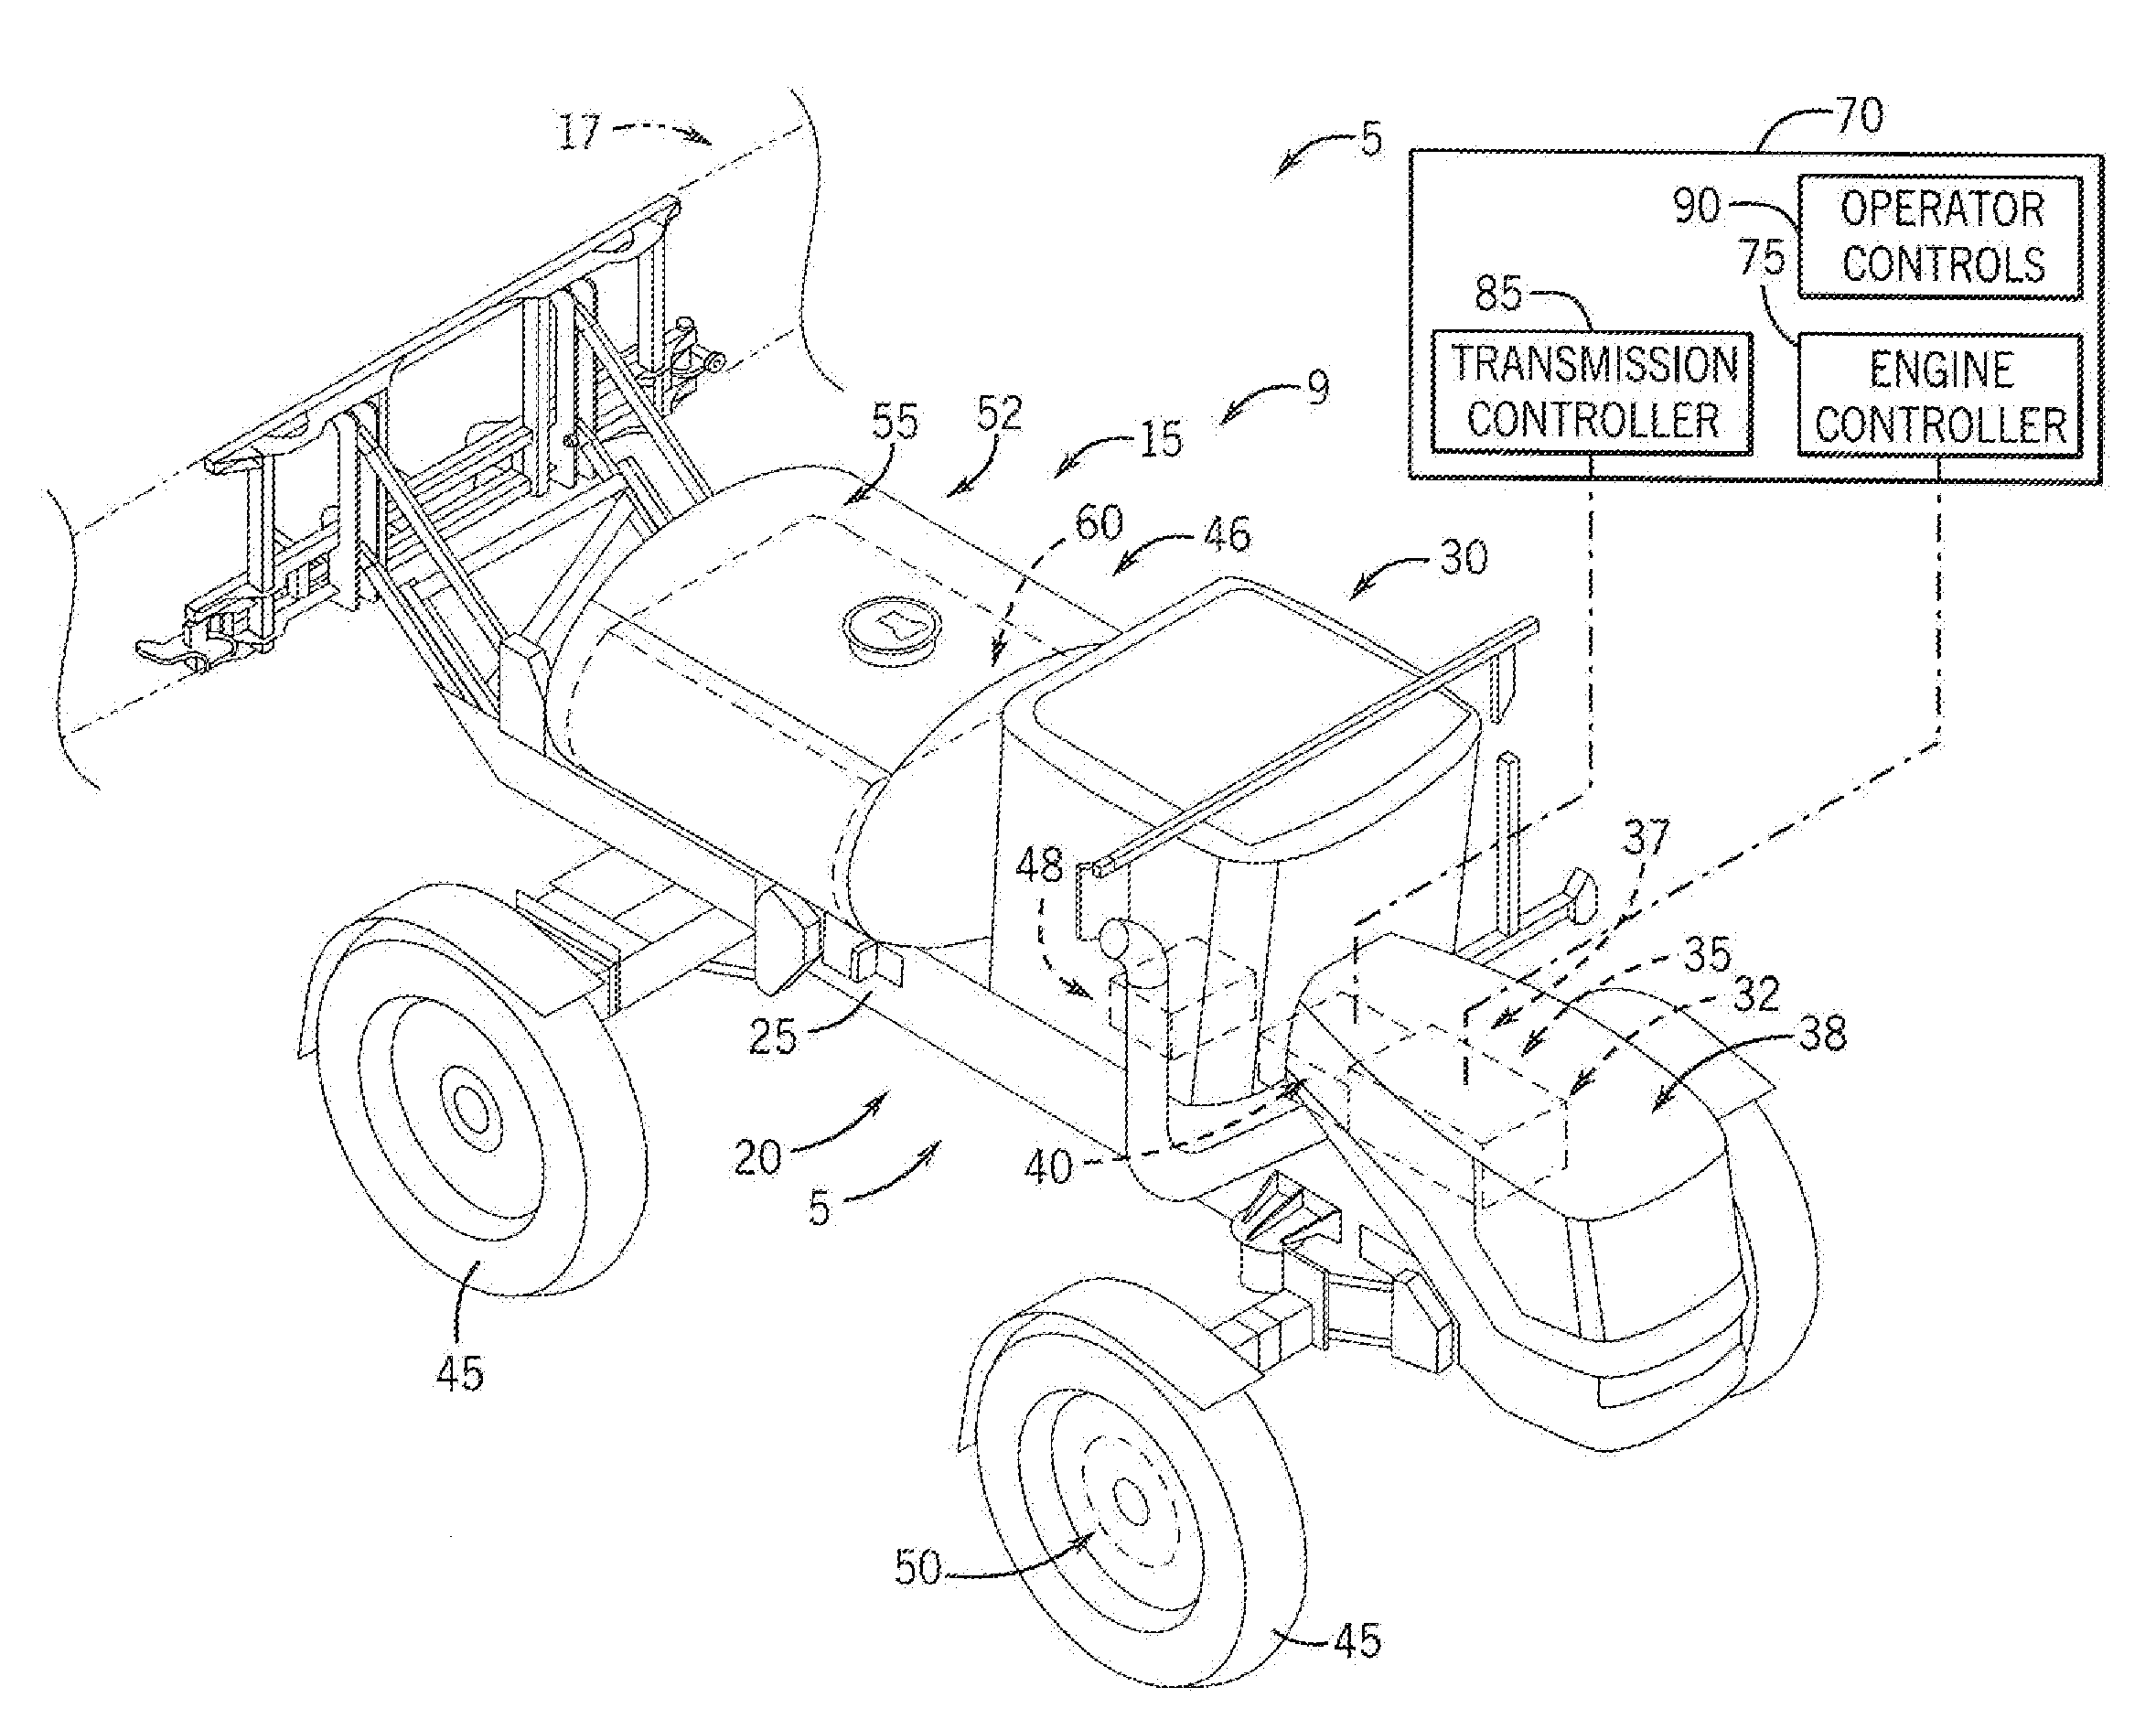 Self-Propelled Off-Road Vehicle With System For Torque Control At Shift Points